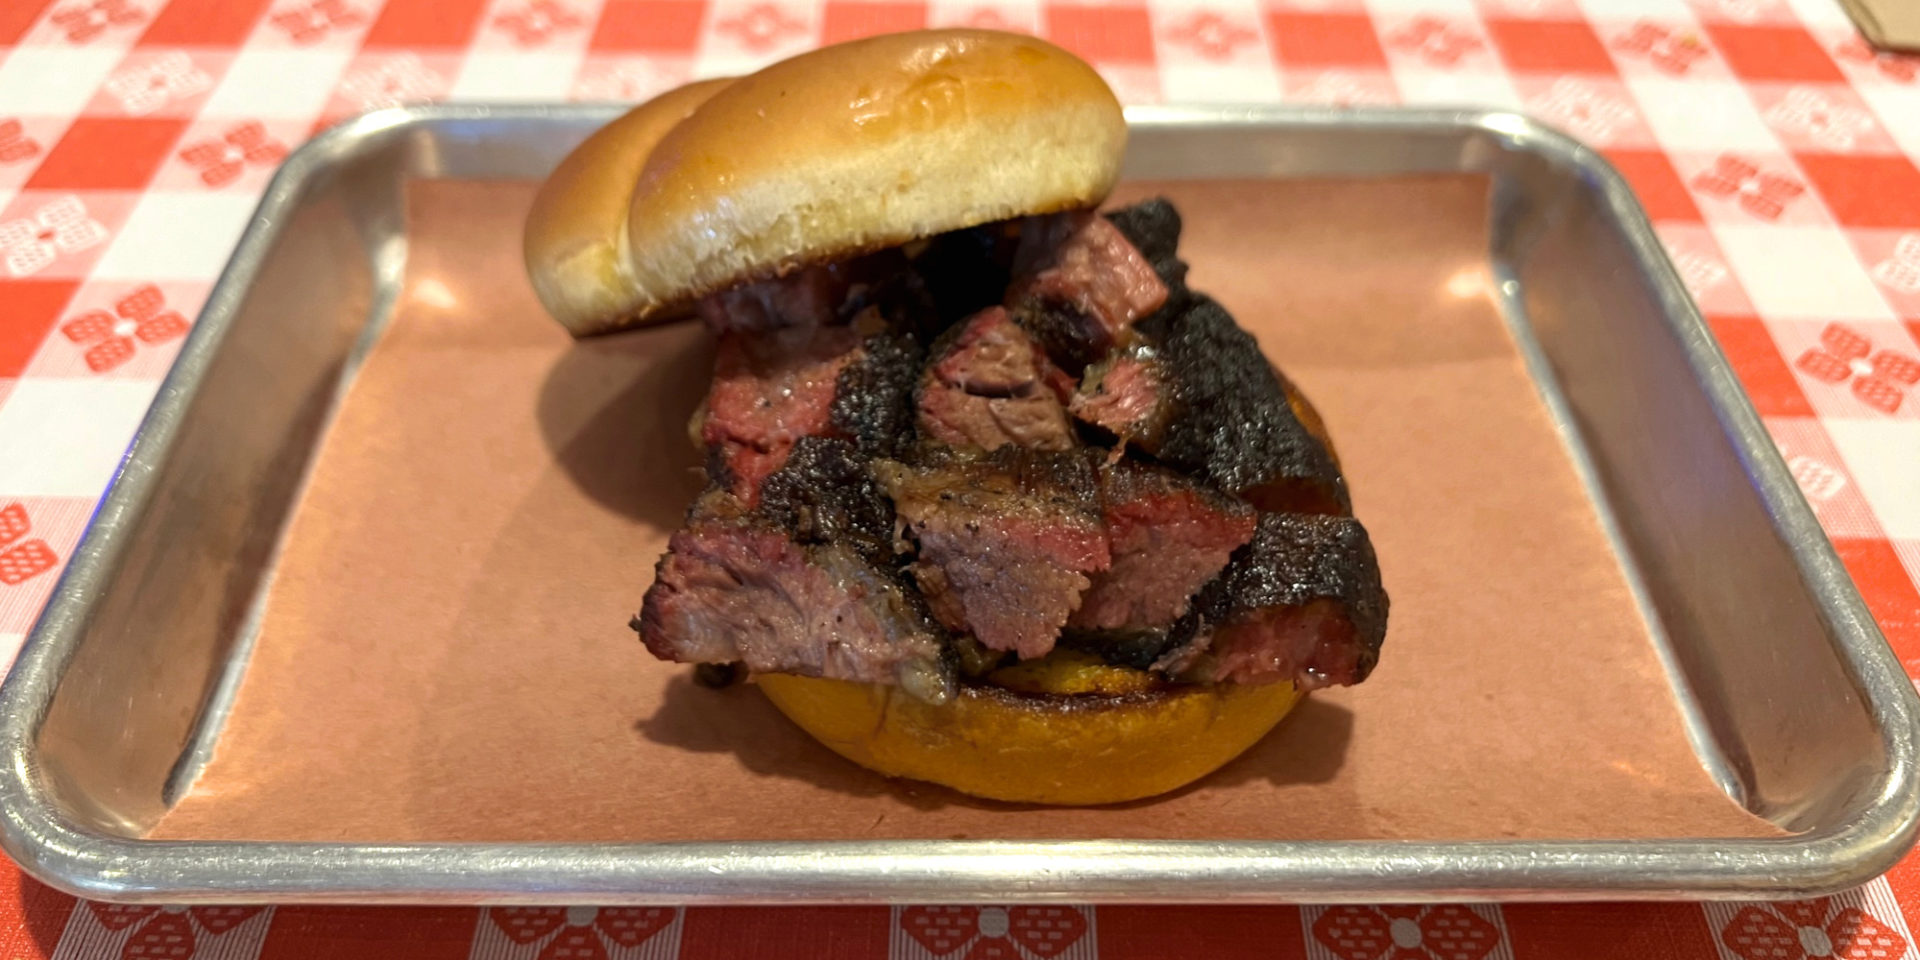 A burnt ends sandwich from Smoky's House BBQ sits on a metal tray atop a red-and-white checkered tableclothed table. Photo by Alyssa Buckley.